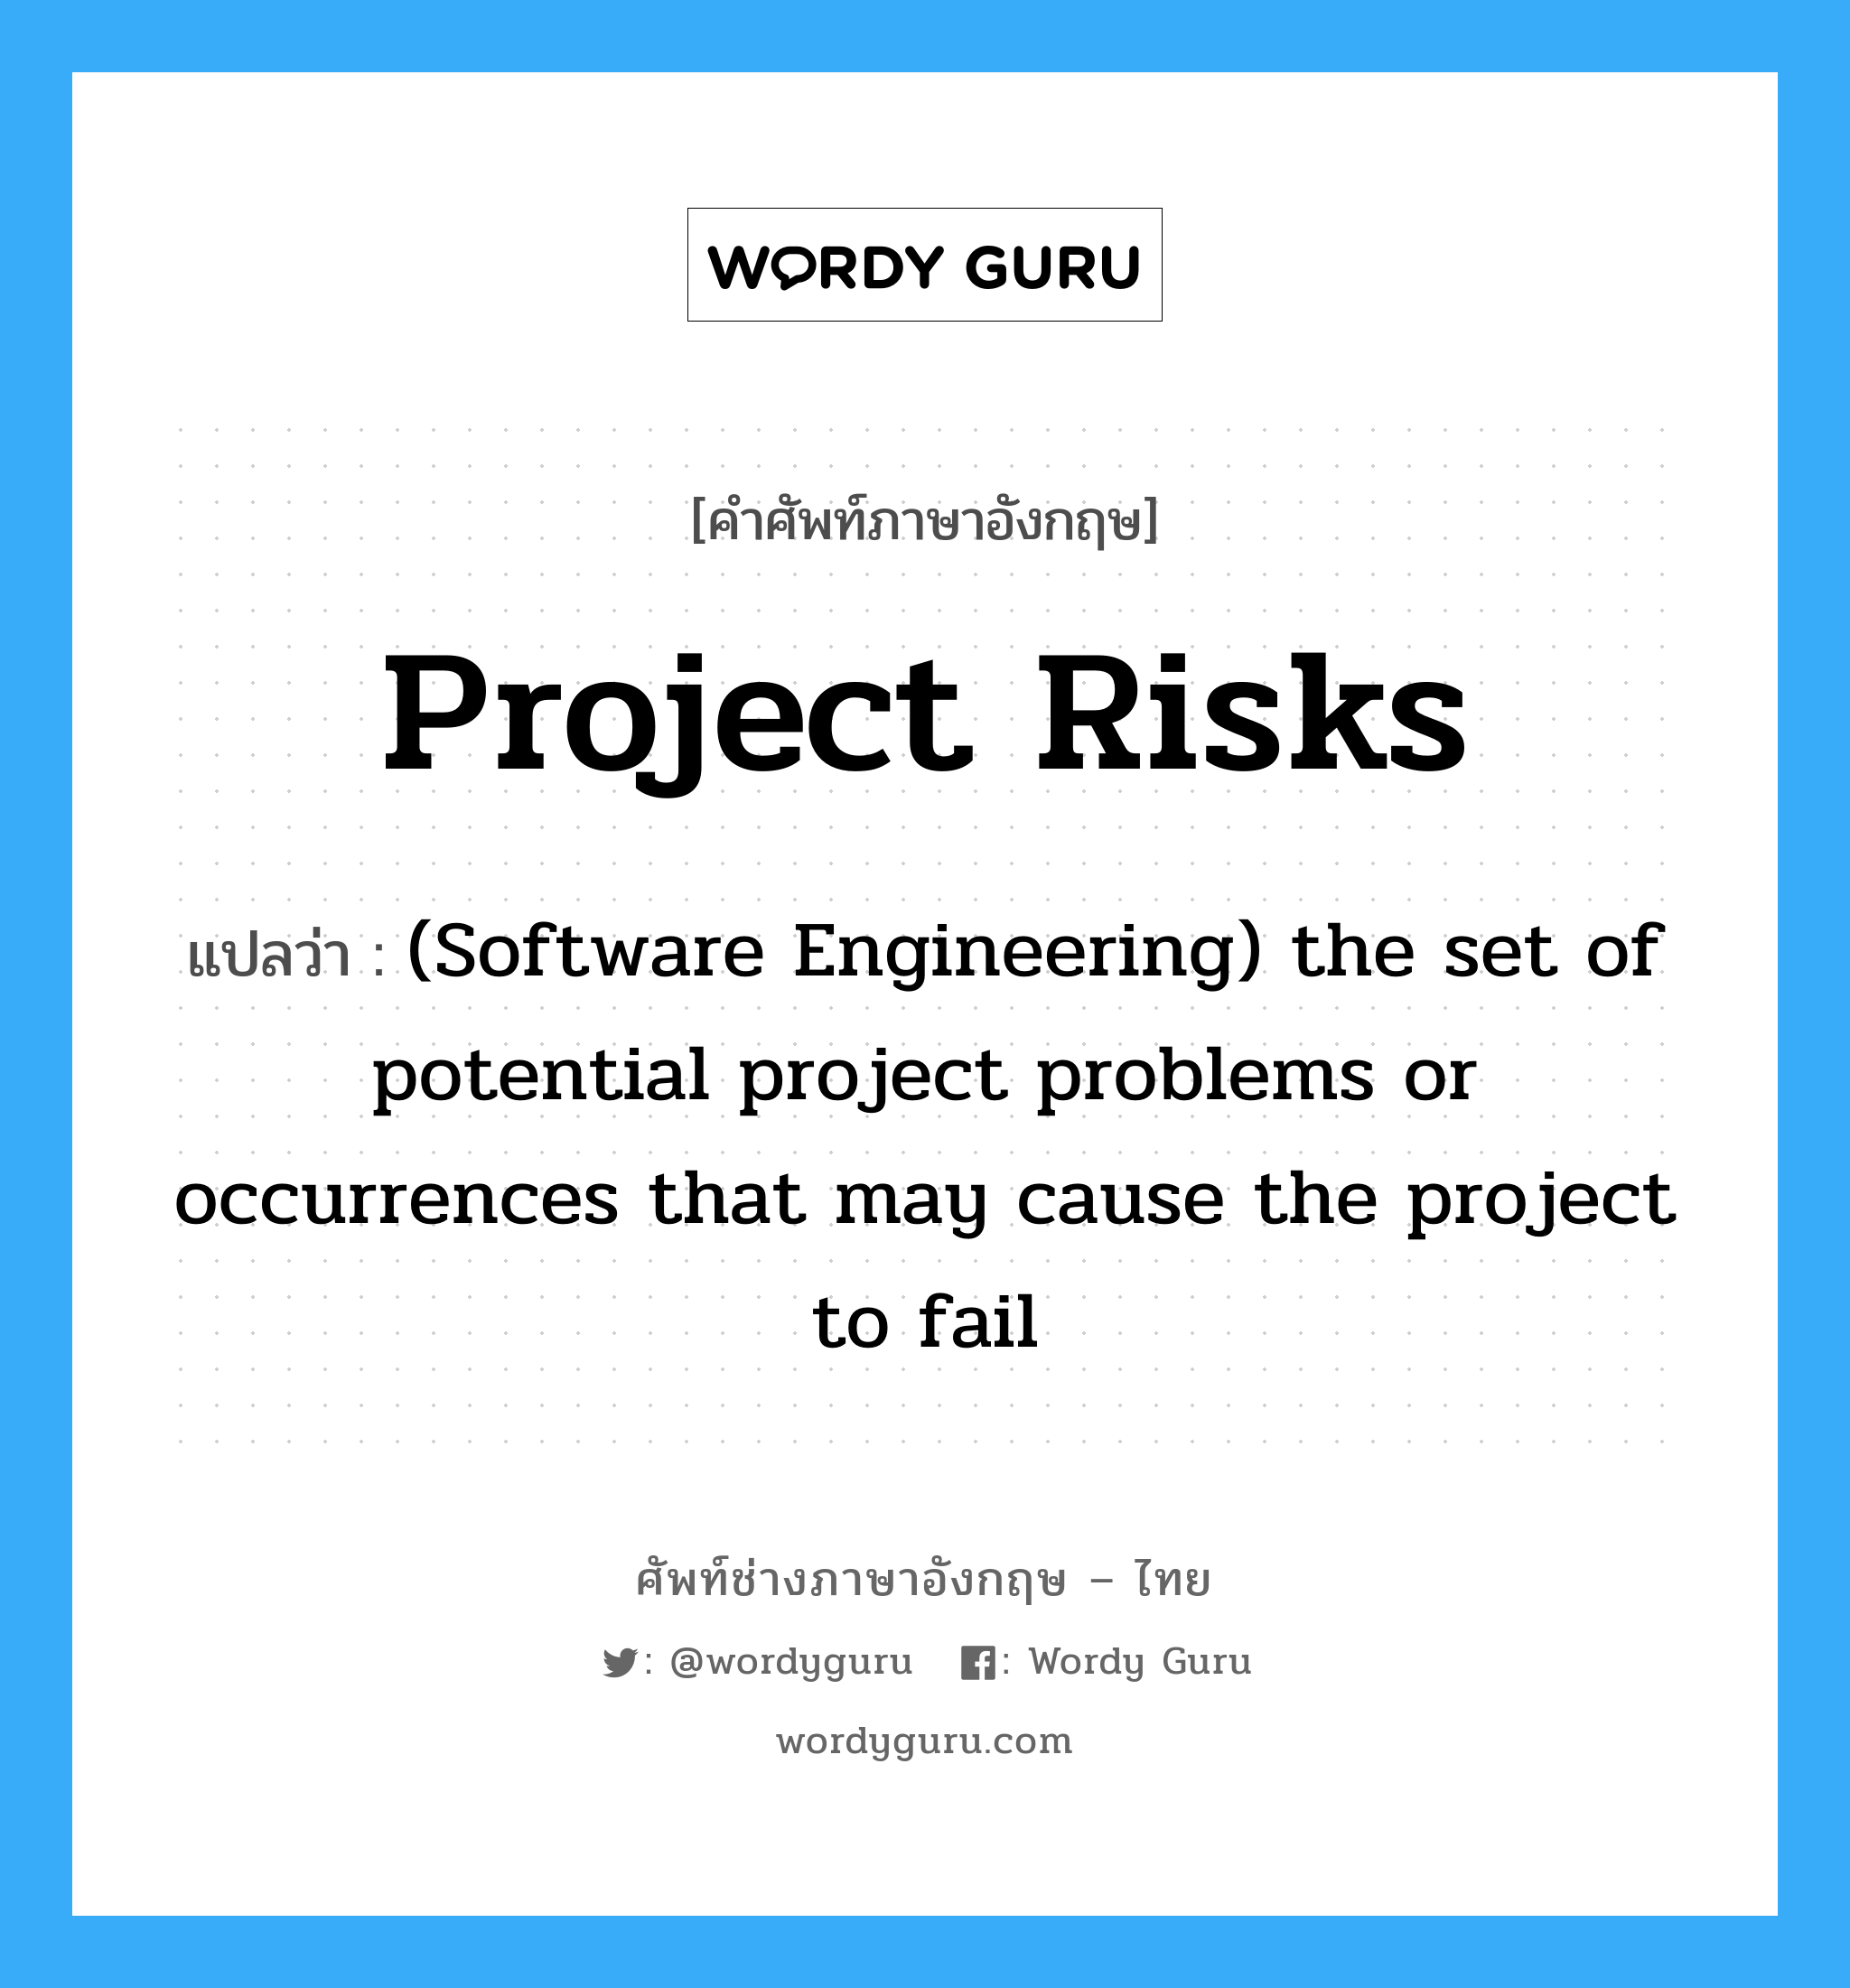 Project risks แปลว่า?, คำศัพท์ช่างภาษาอังกฤษ - ไทย Project risks คำศัพท์ภาษาอังกฤษ Project risks แปลว่า (Software Engineering) the set of potential project problems or occurrences that may cause the project to fail